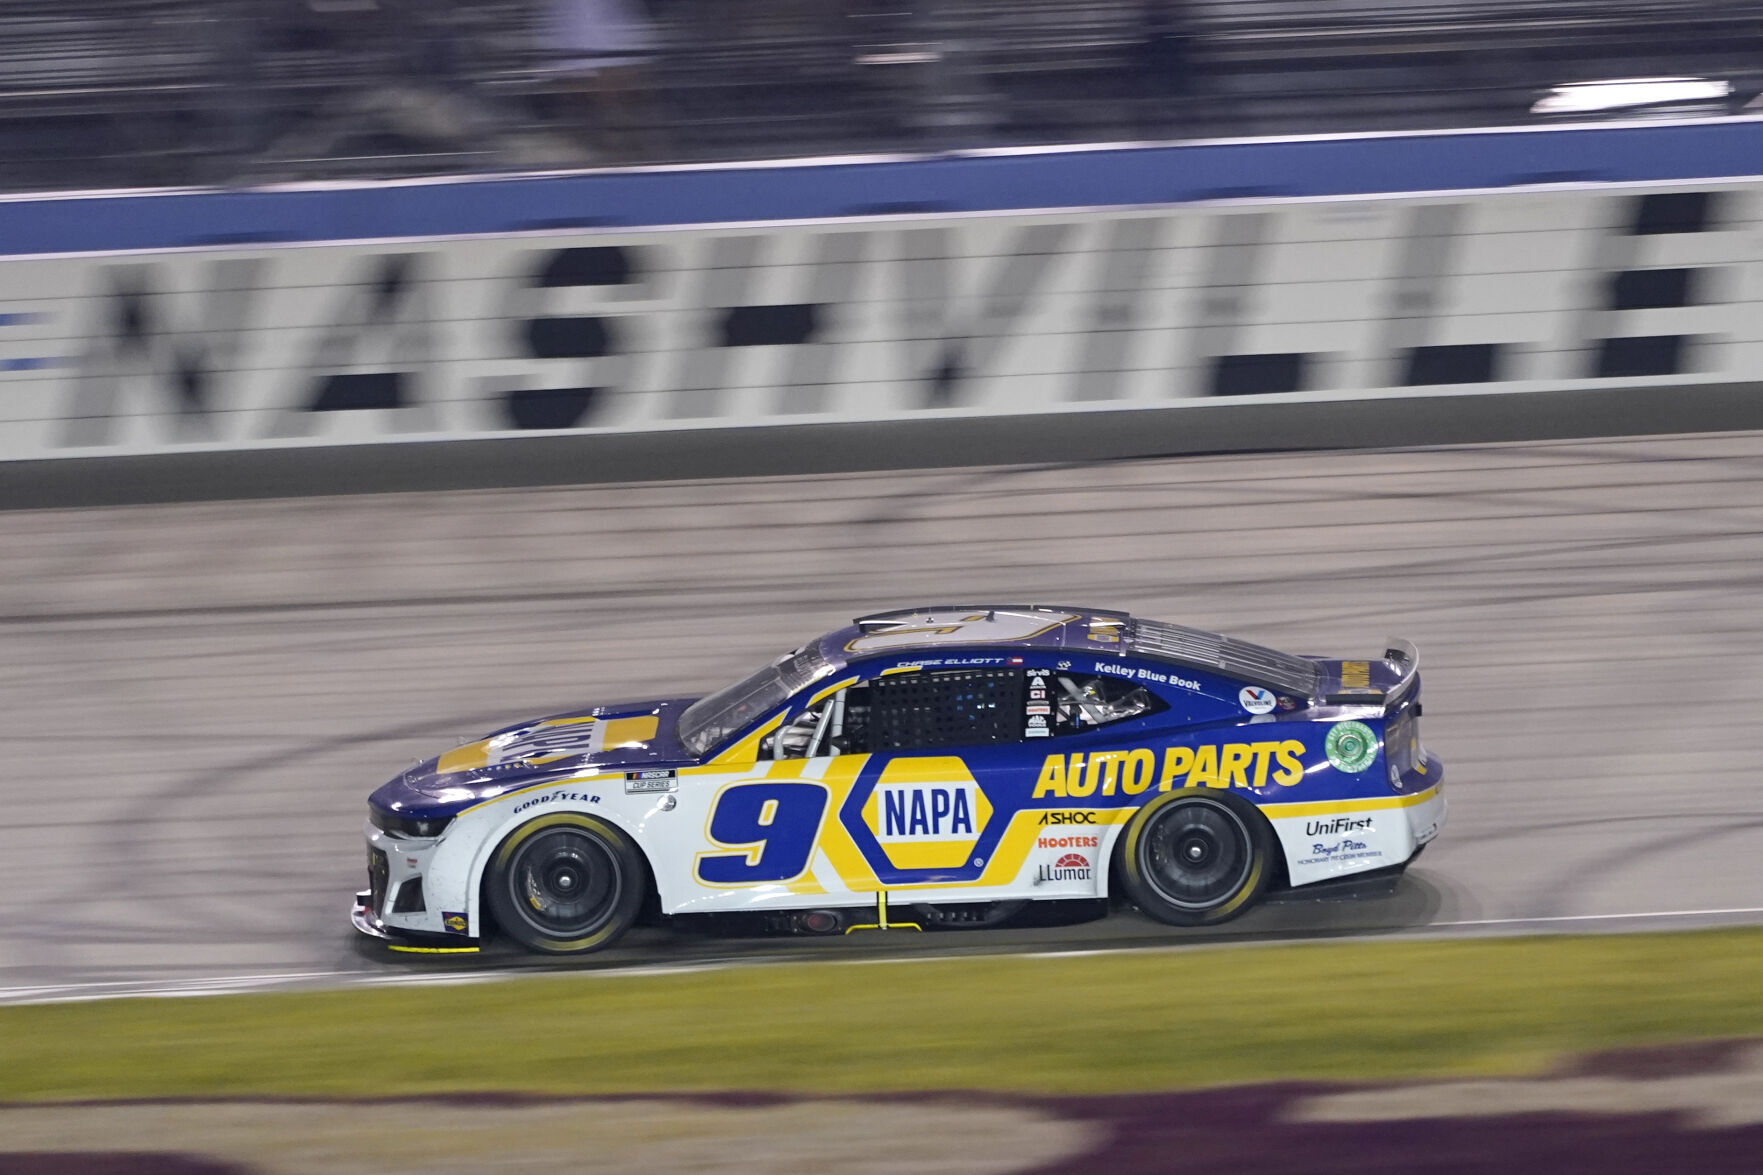 NASCAR Nashville Superspeedway odds, picks and predictions for the Ally 400